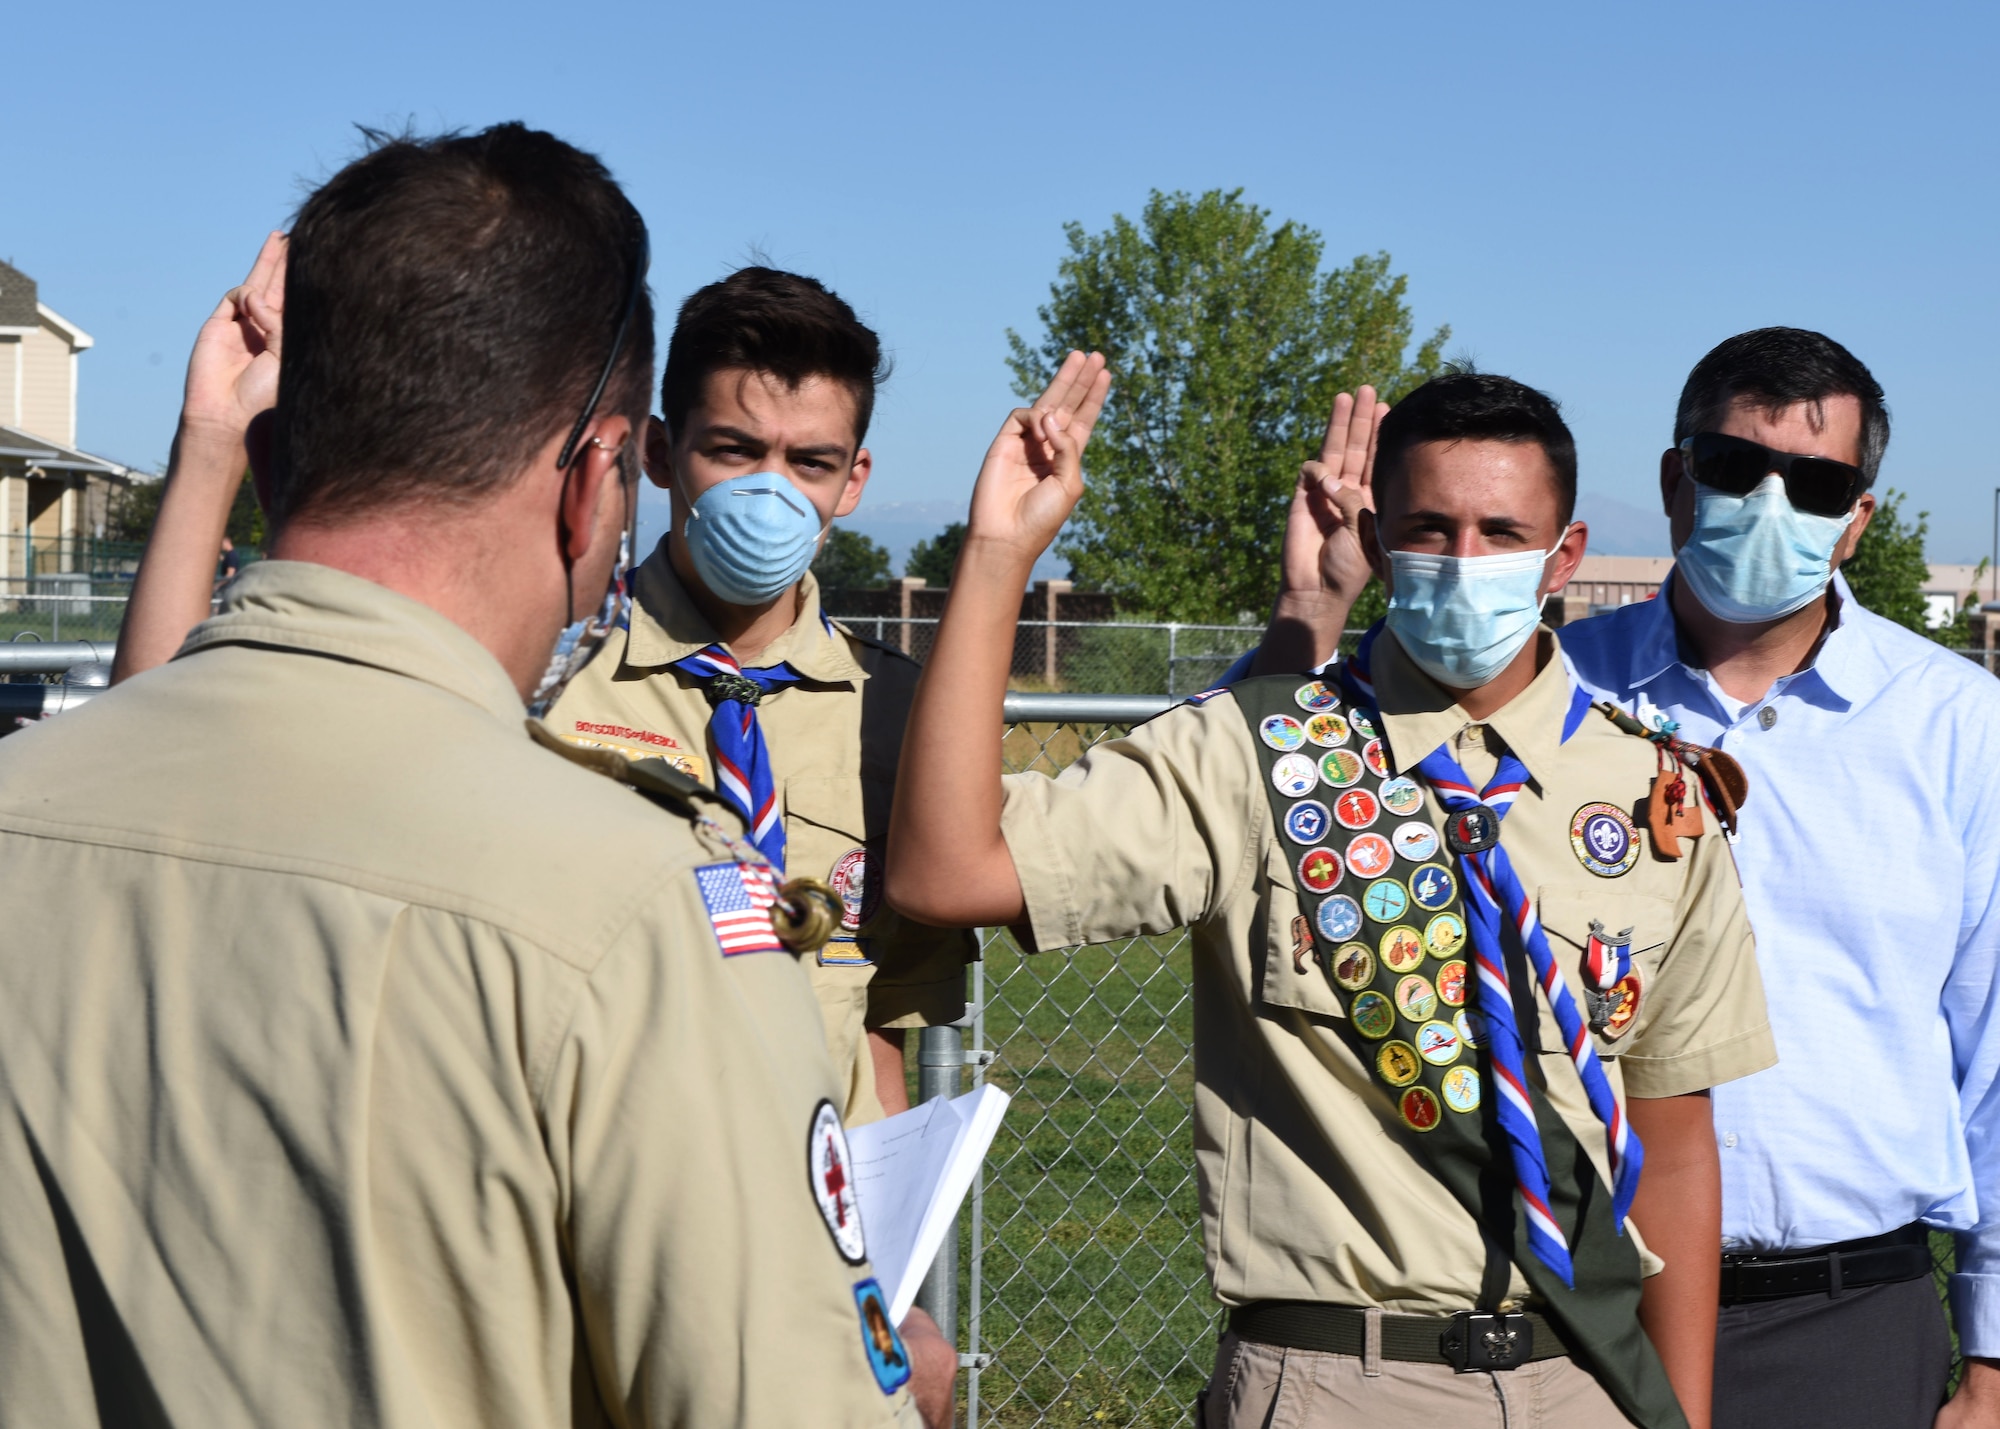 Spencer Fogg, Troop 630 Eagle Scout, participates in the Eagle Oath and Charge at the dog park on Buckley Air Force Base, Colo., Aug. 7, 2020. Fogg was promoted to Eagle Scout after successfully completing the base dog park community project. (U.S. Air Force photo by Airman 1st Class Haley N. Blevins)